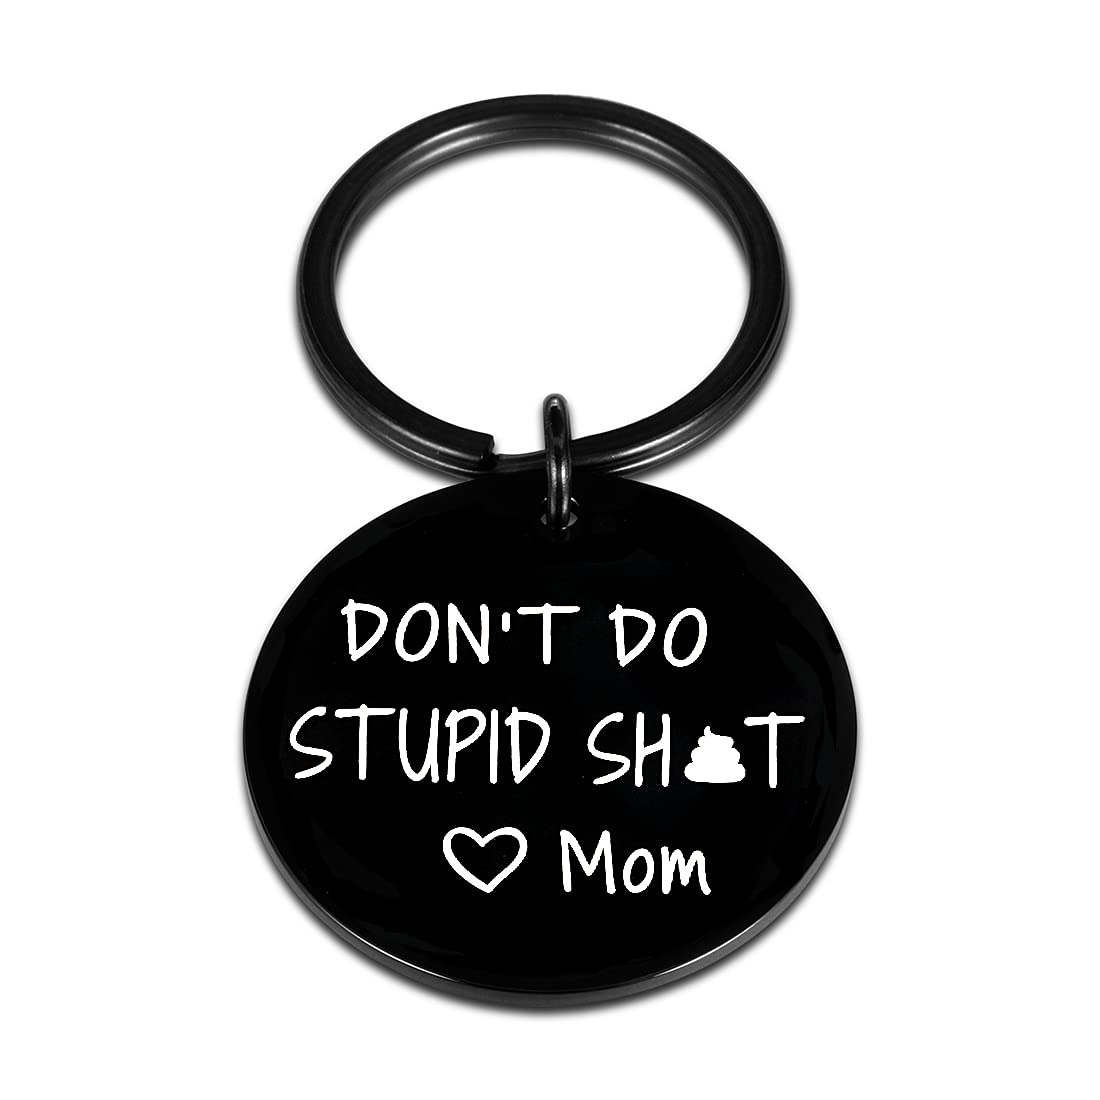 Don't Do Stupid Shit Keychain, Funny Gift for Teens Son Daughter from Mom  and Dad, Humor Key Ring Presents, Black E4S3 